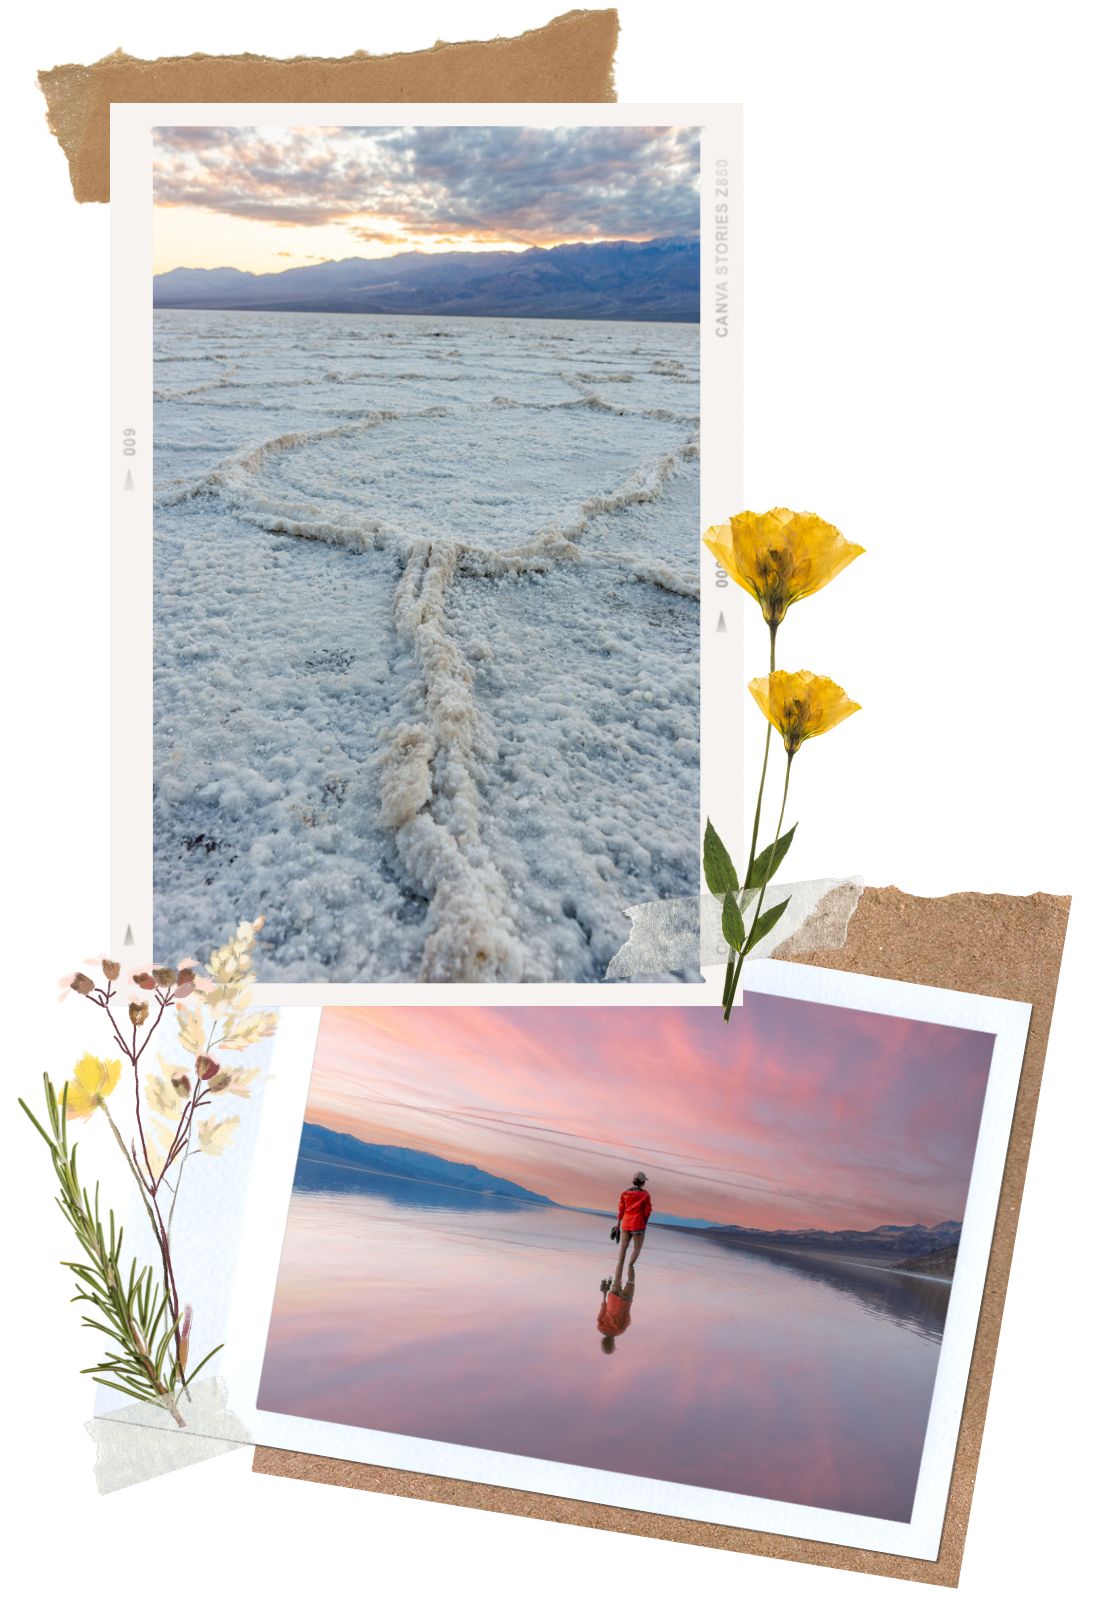 Badwater Salt Flat - 5 Easy Hikes in Death Valley National Park